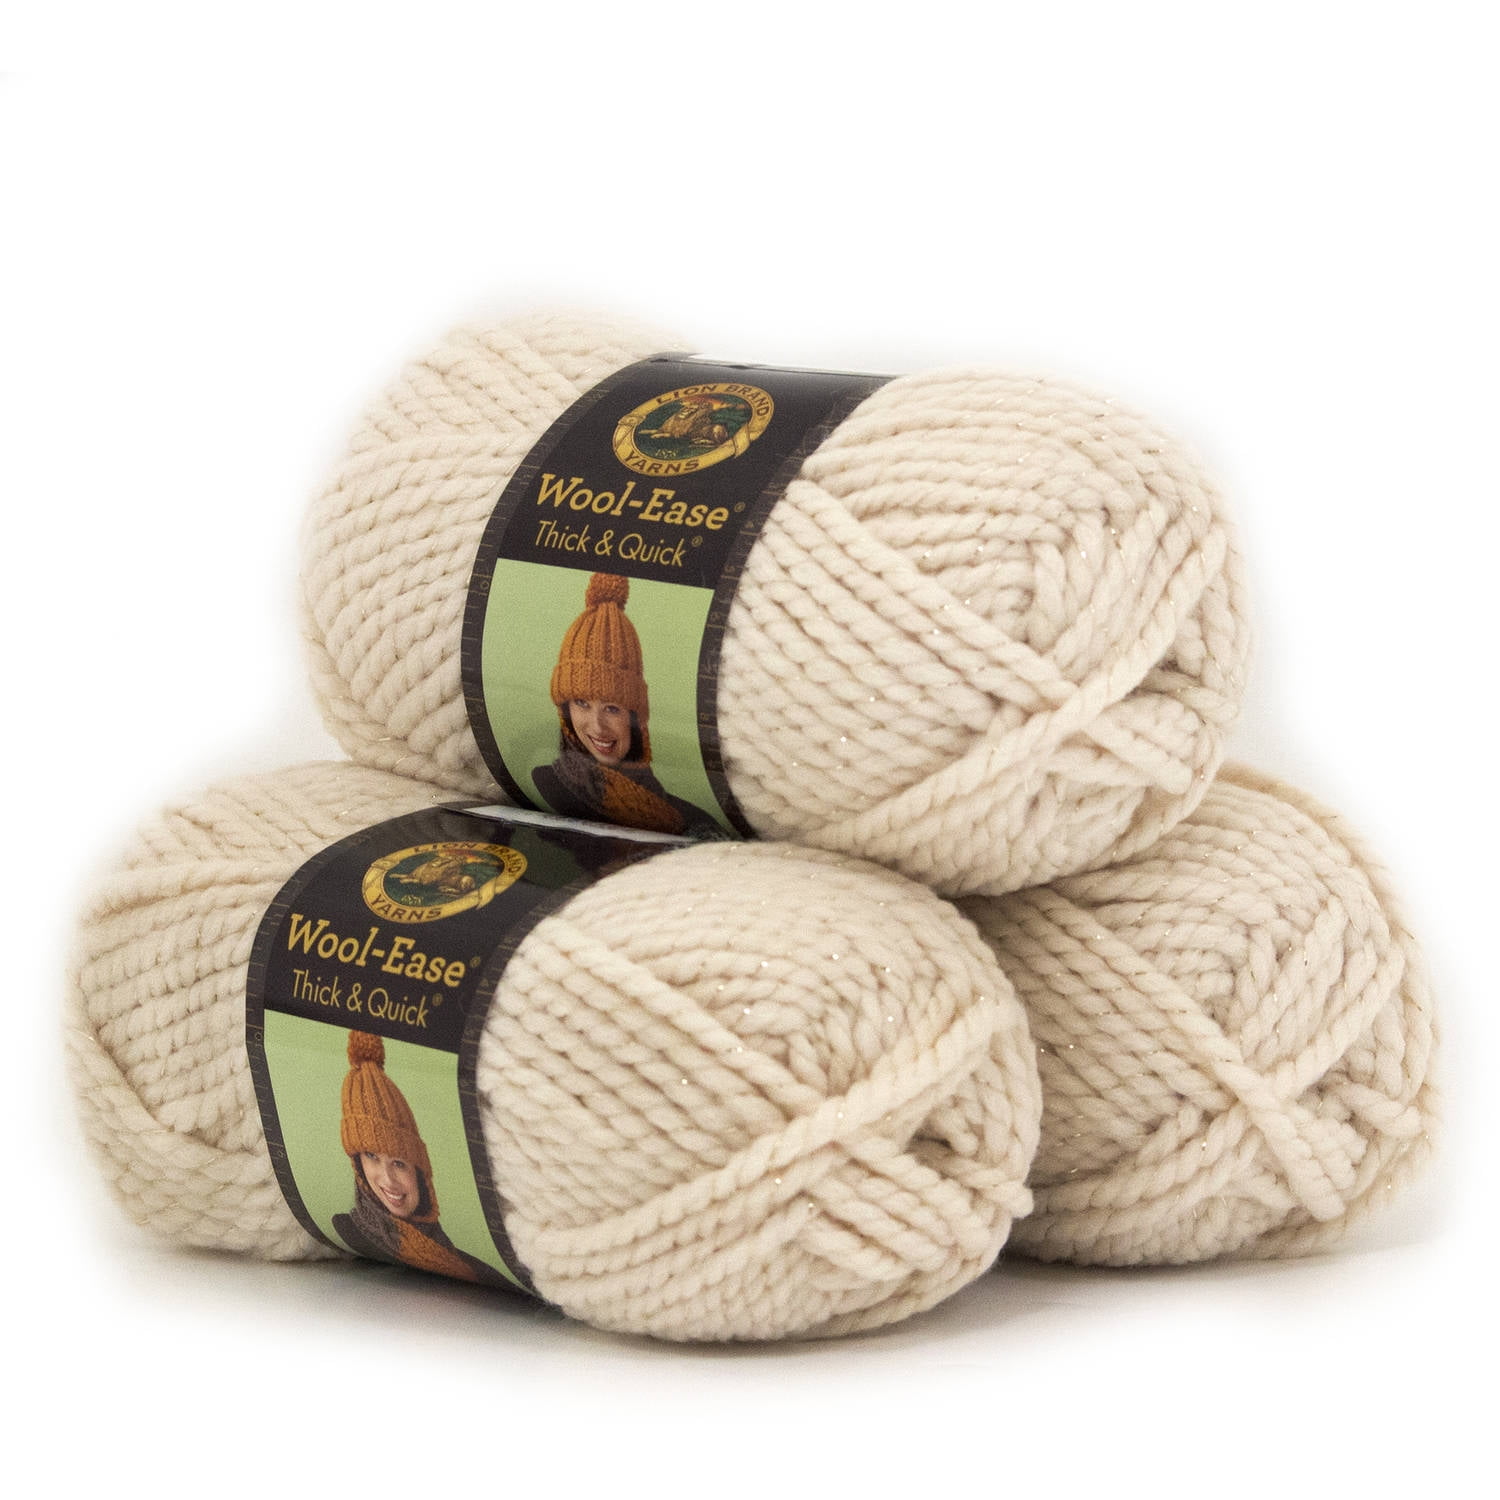 LION BRAND WOOL Ease Thick and Quick Yarn Arctic Ice 5 Oz. / 140 G. 87  Yards / 80 Meters Super Bulky 6 